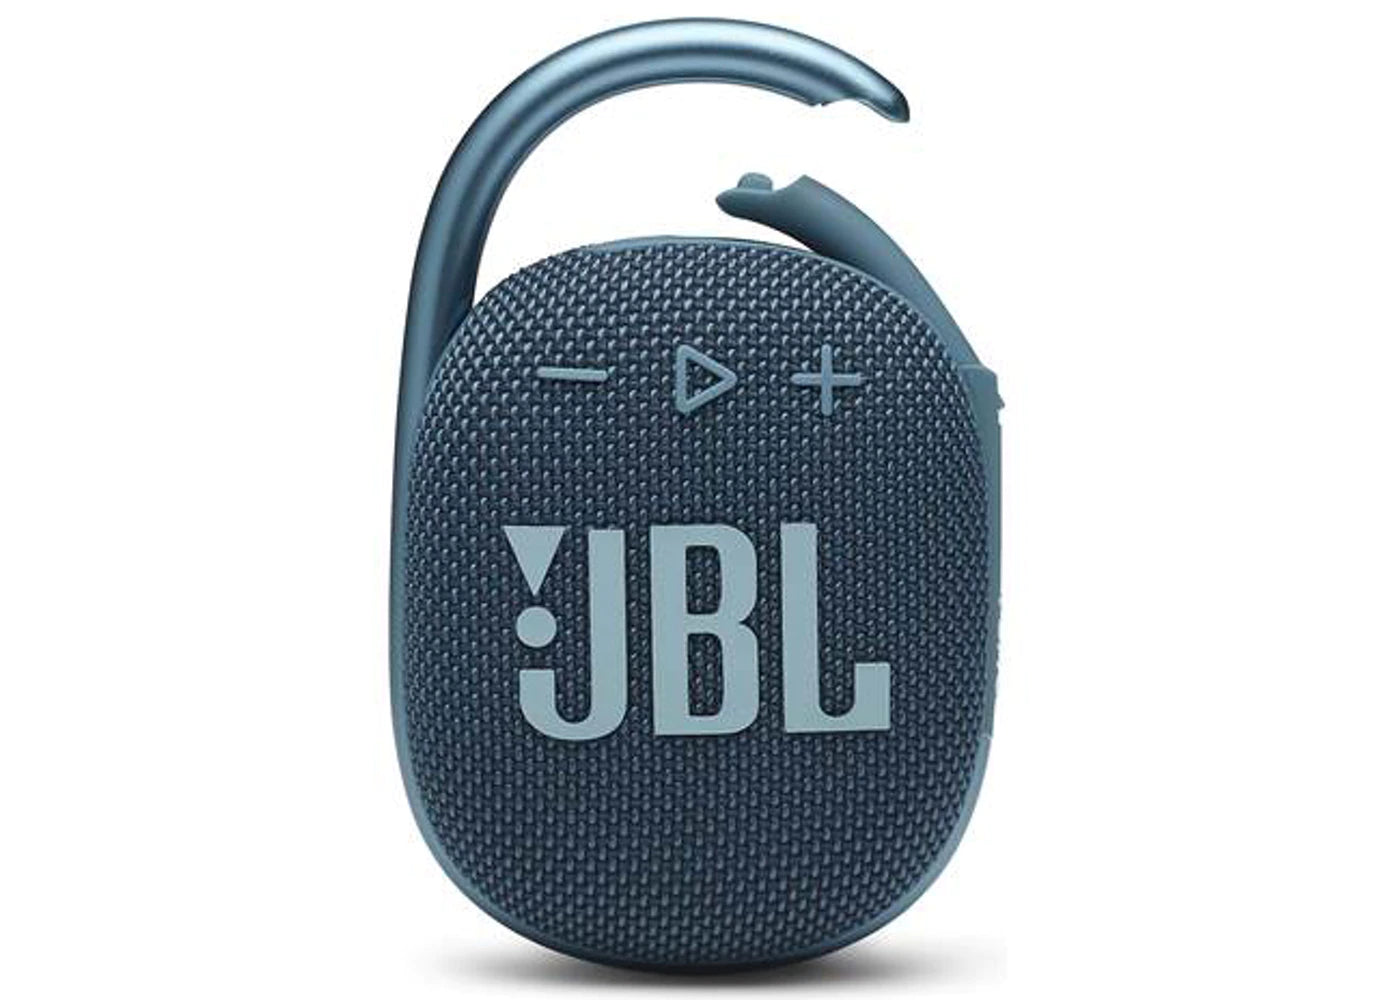 JBL Clip 4 Ultra-portable IPX7 Waterproof Speaker - Blue from MagicVision